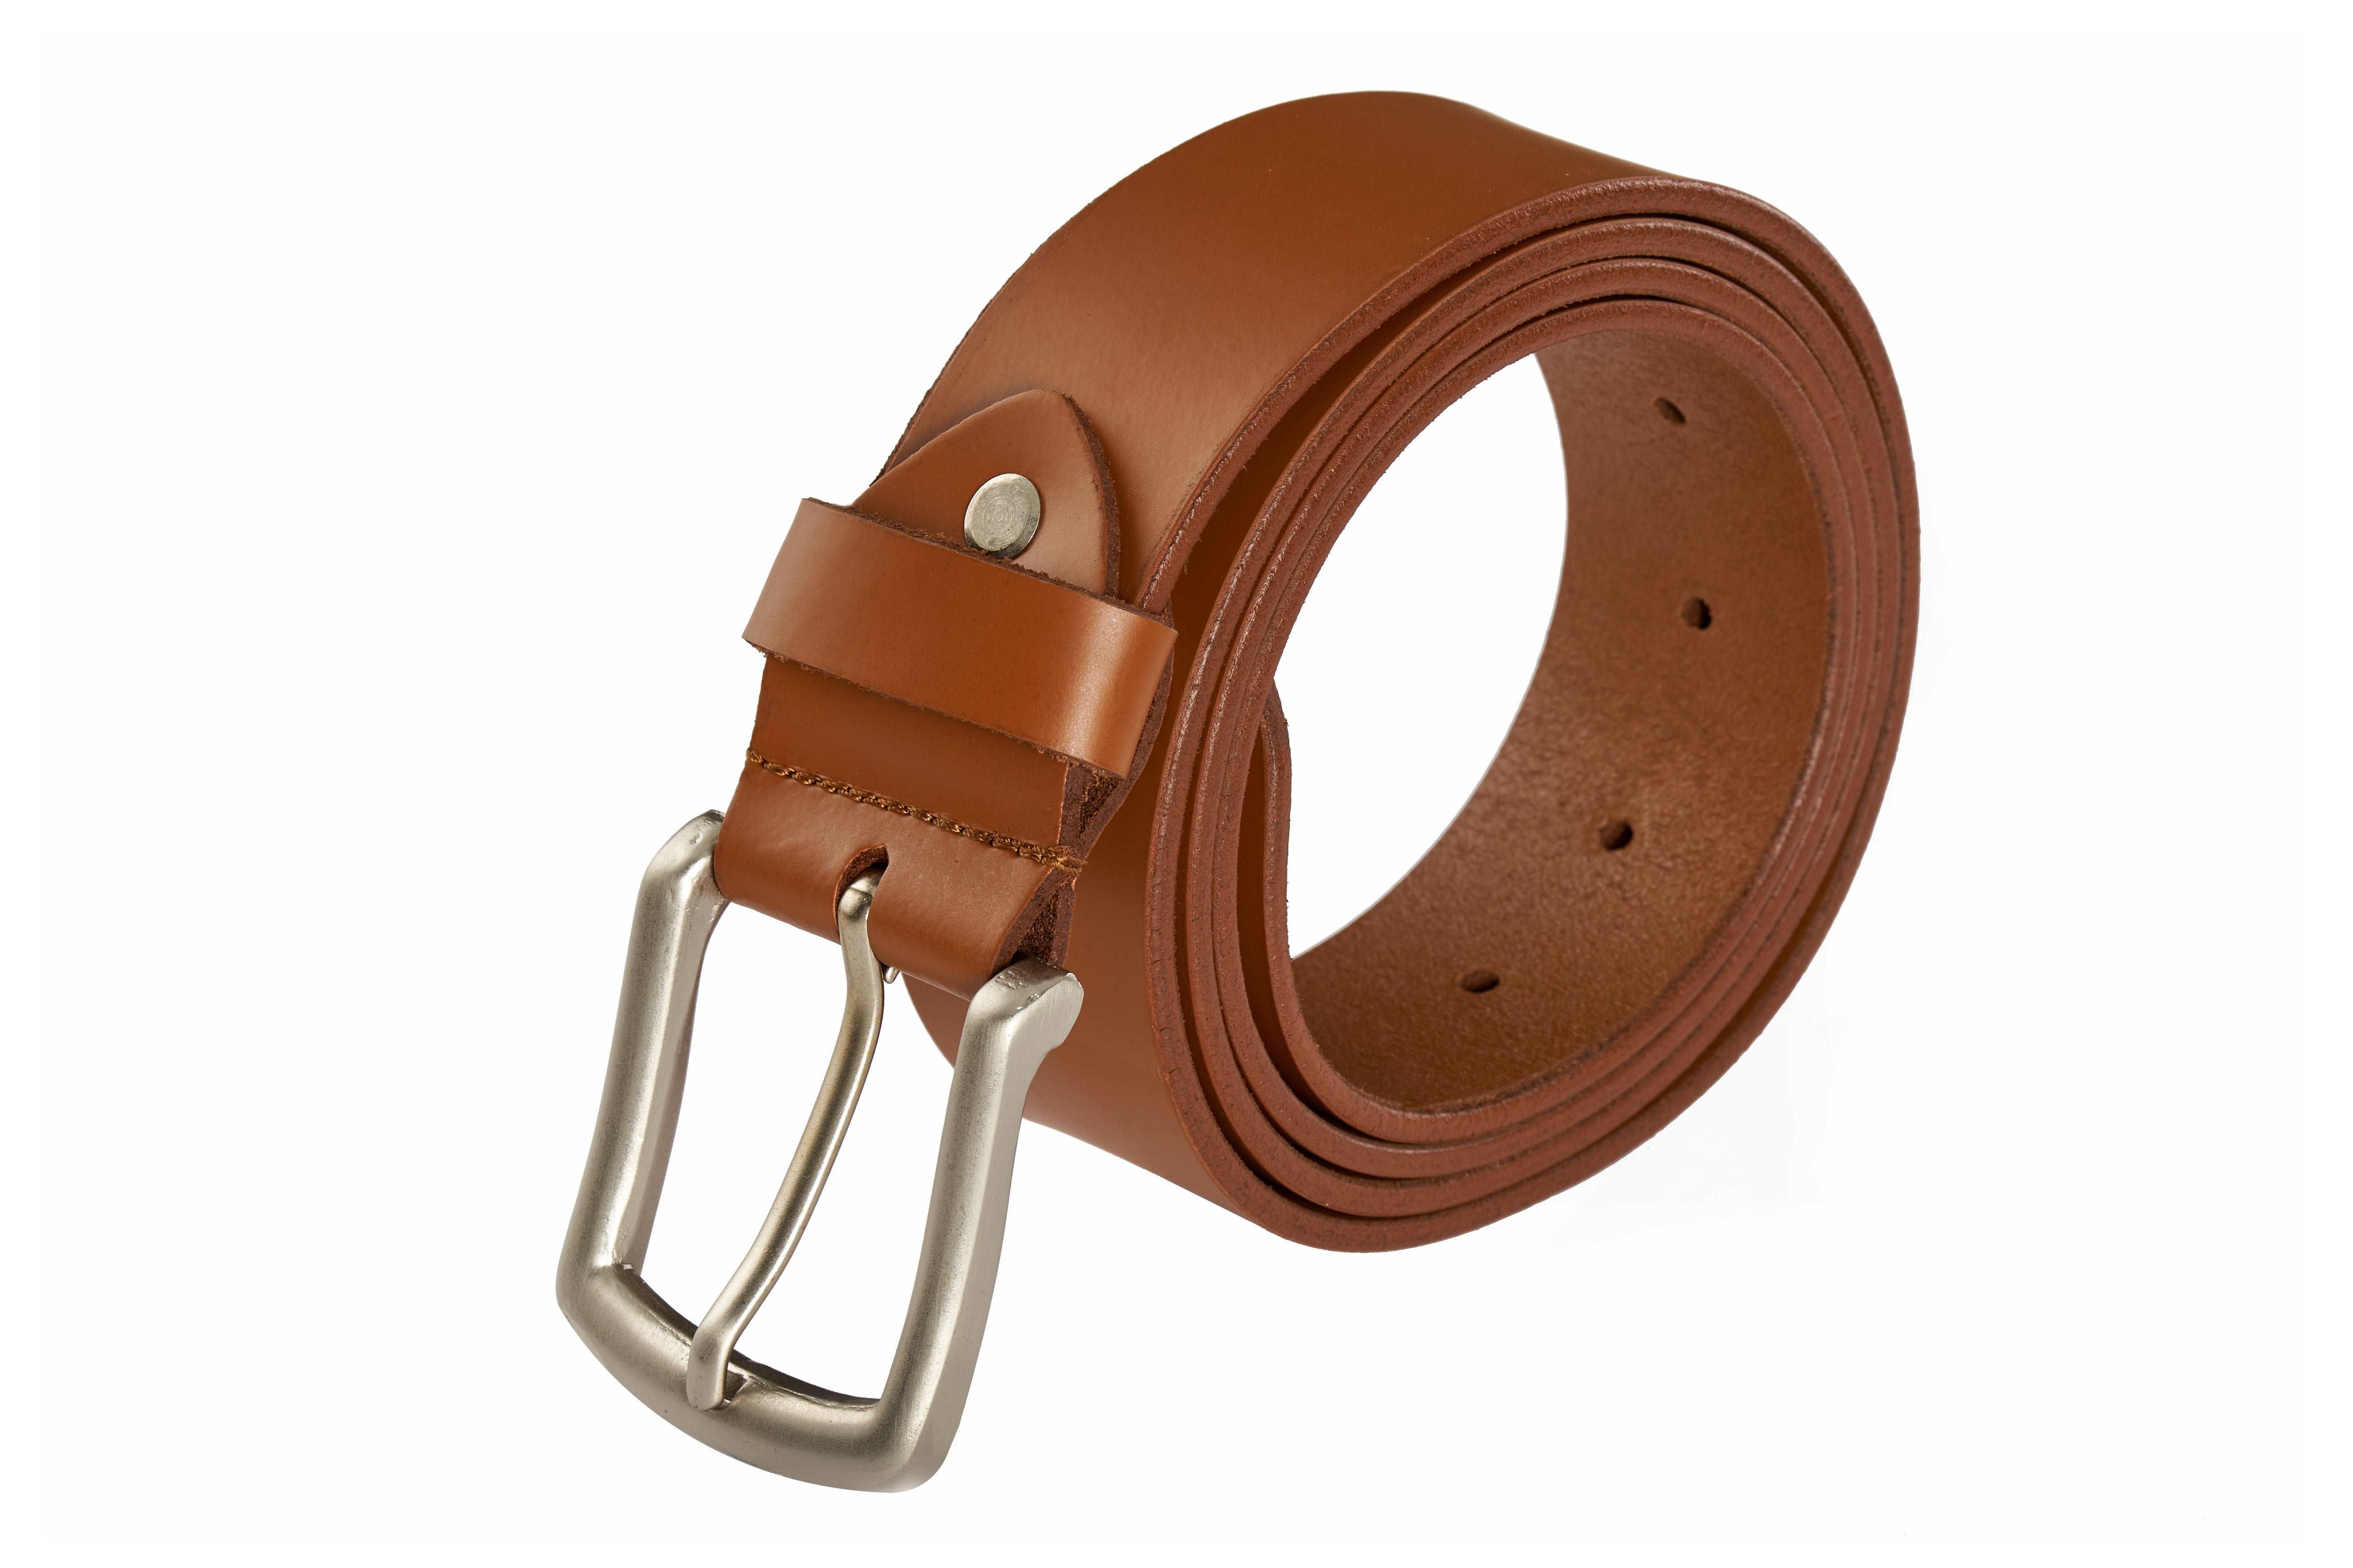 Craftsman's Touch - Handmade Tan Leather Belt, Timeless and Sustainable